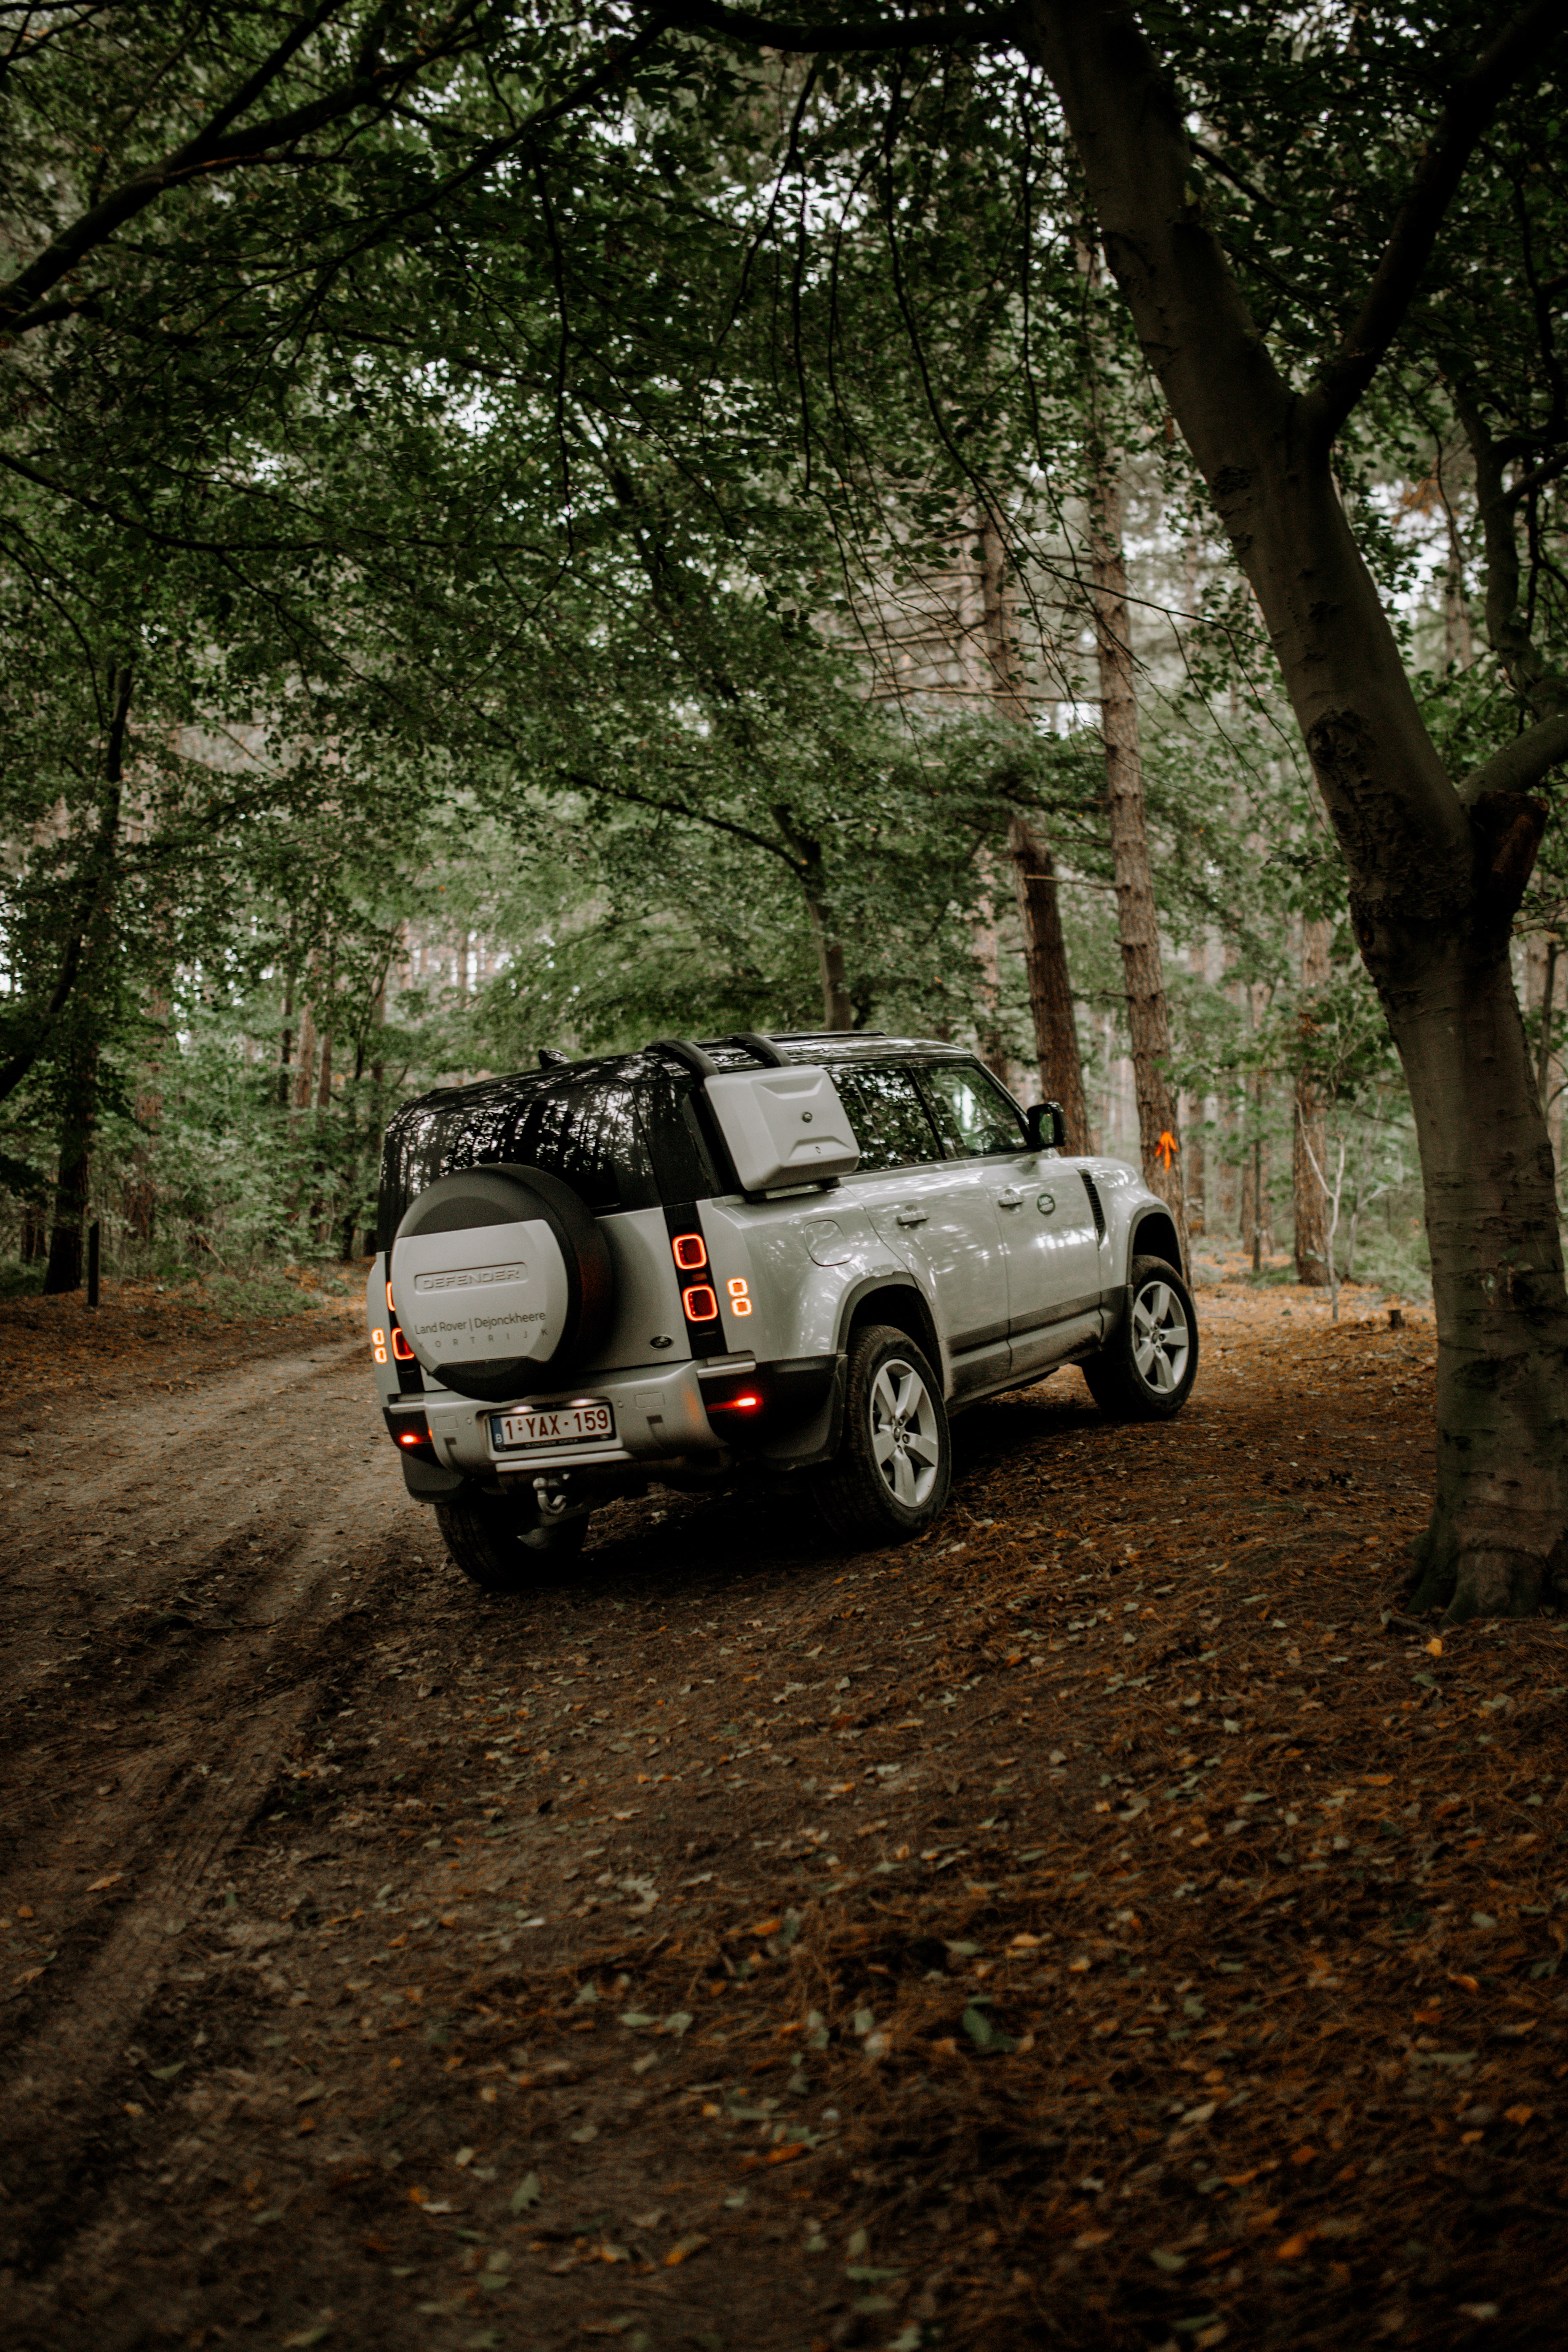 land rover, suv, rear view, cars, forest, car, back view